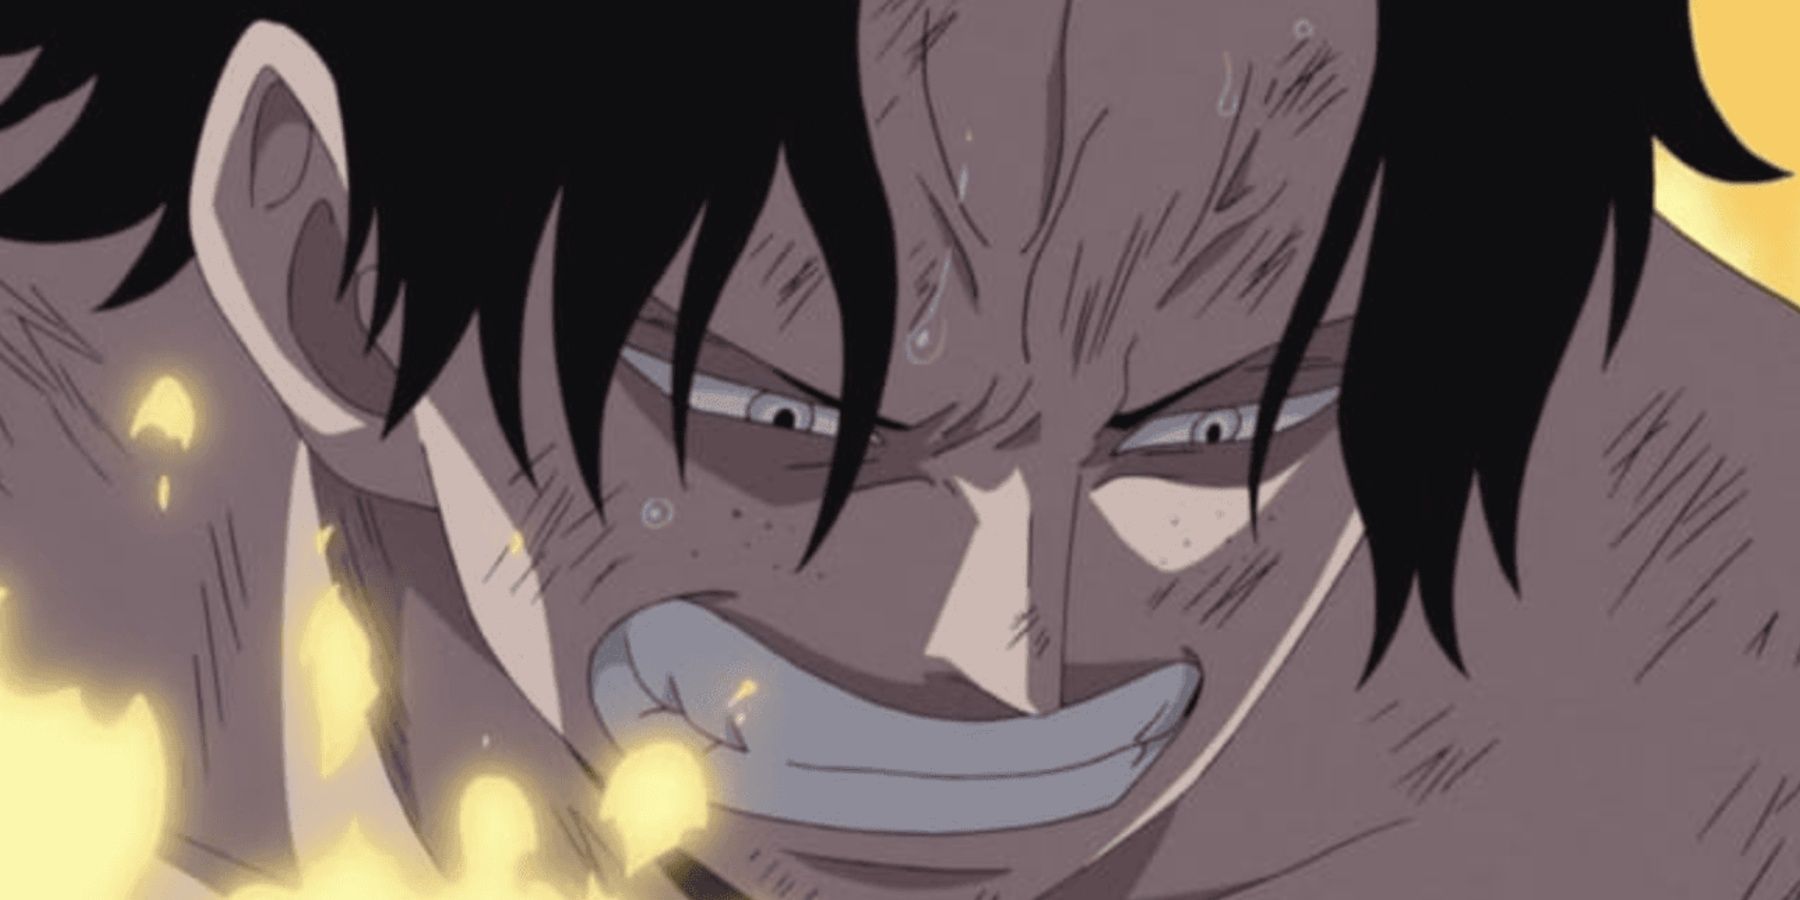 Ace In Pain After Getting Hit By Akainu In One Piece